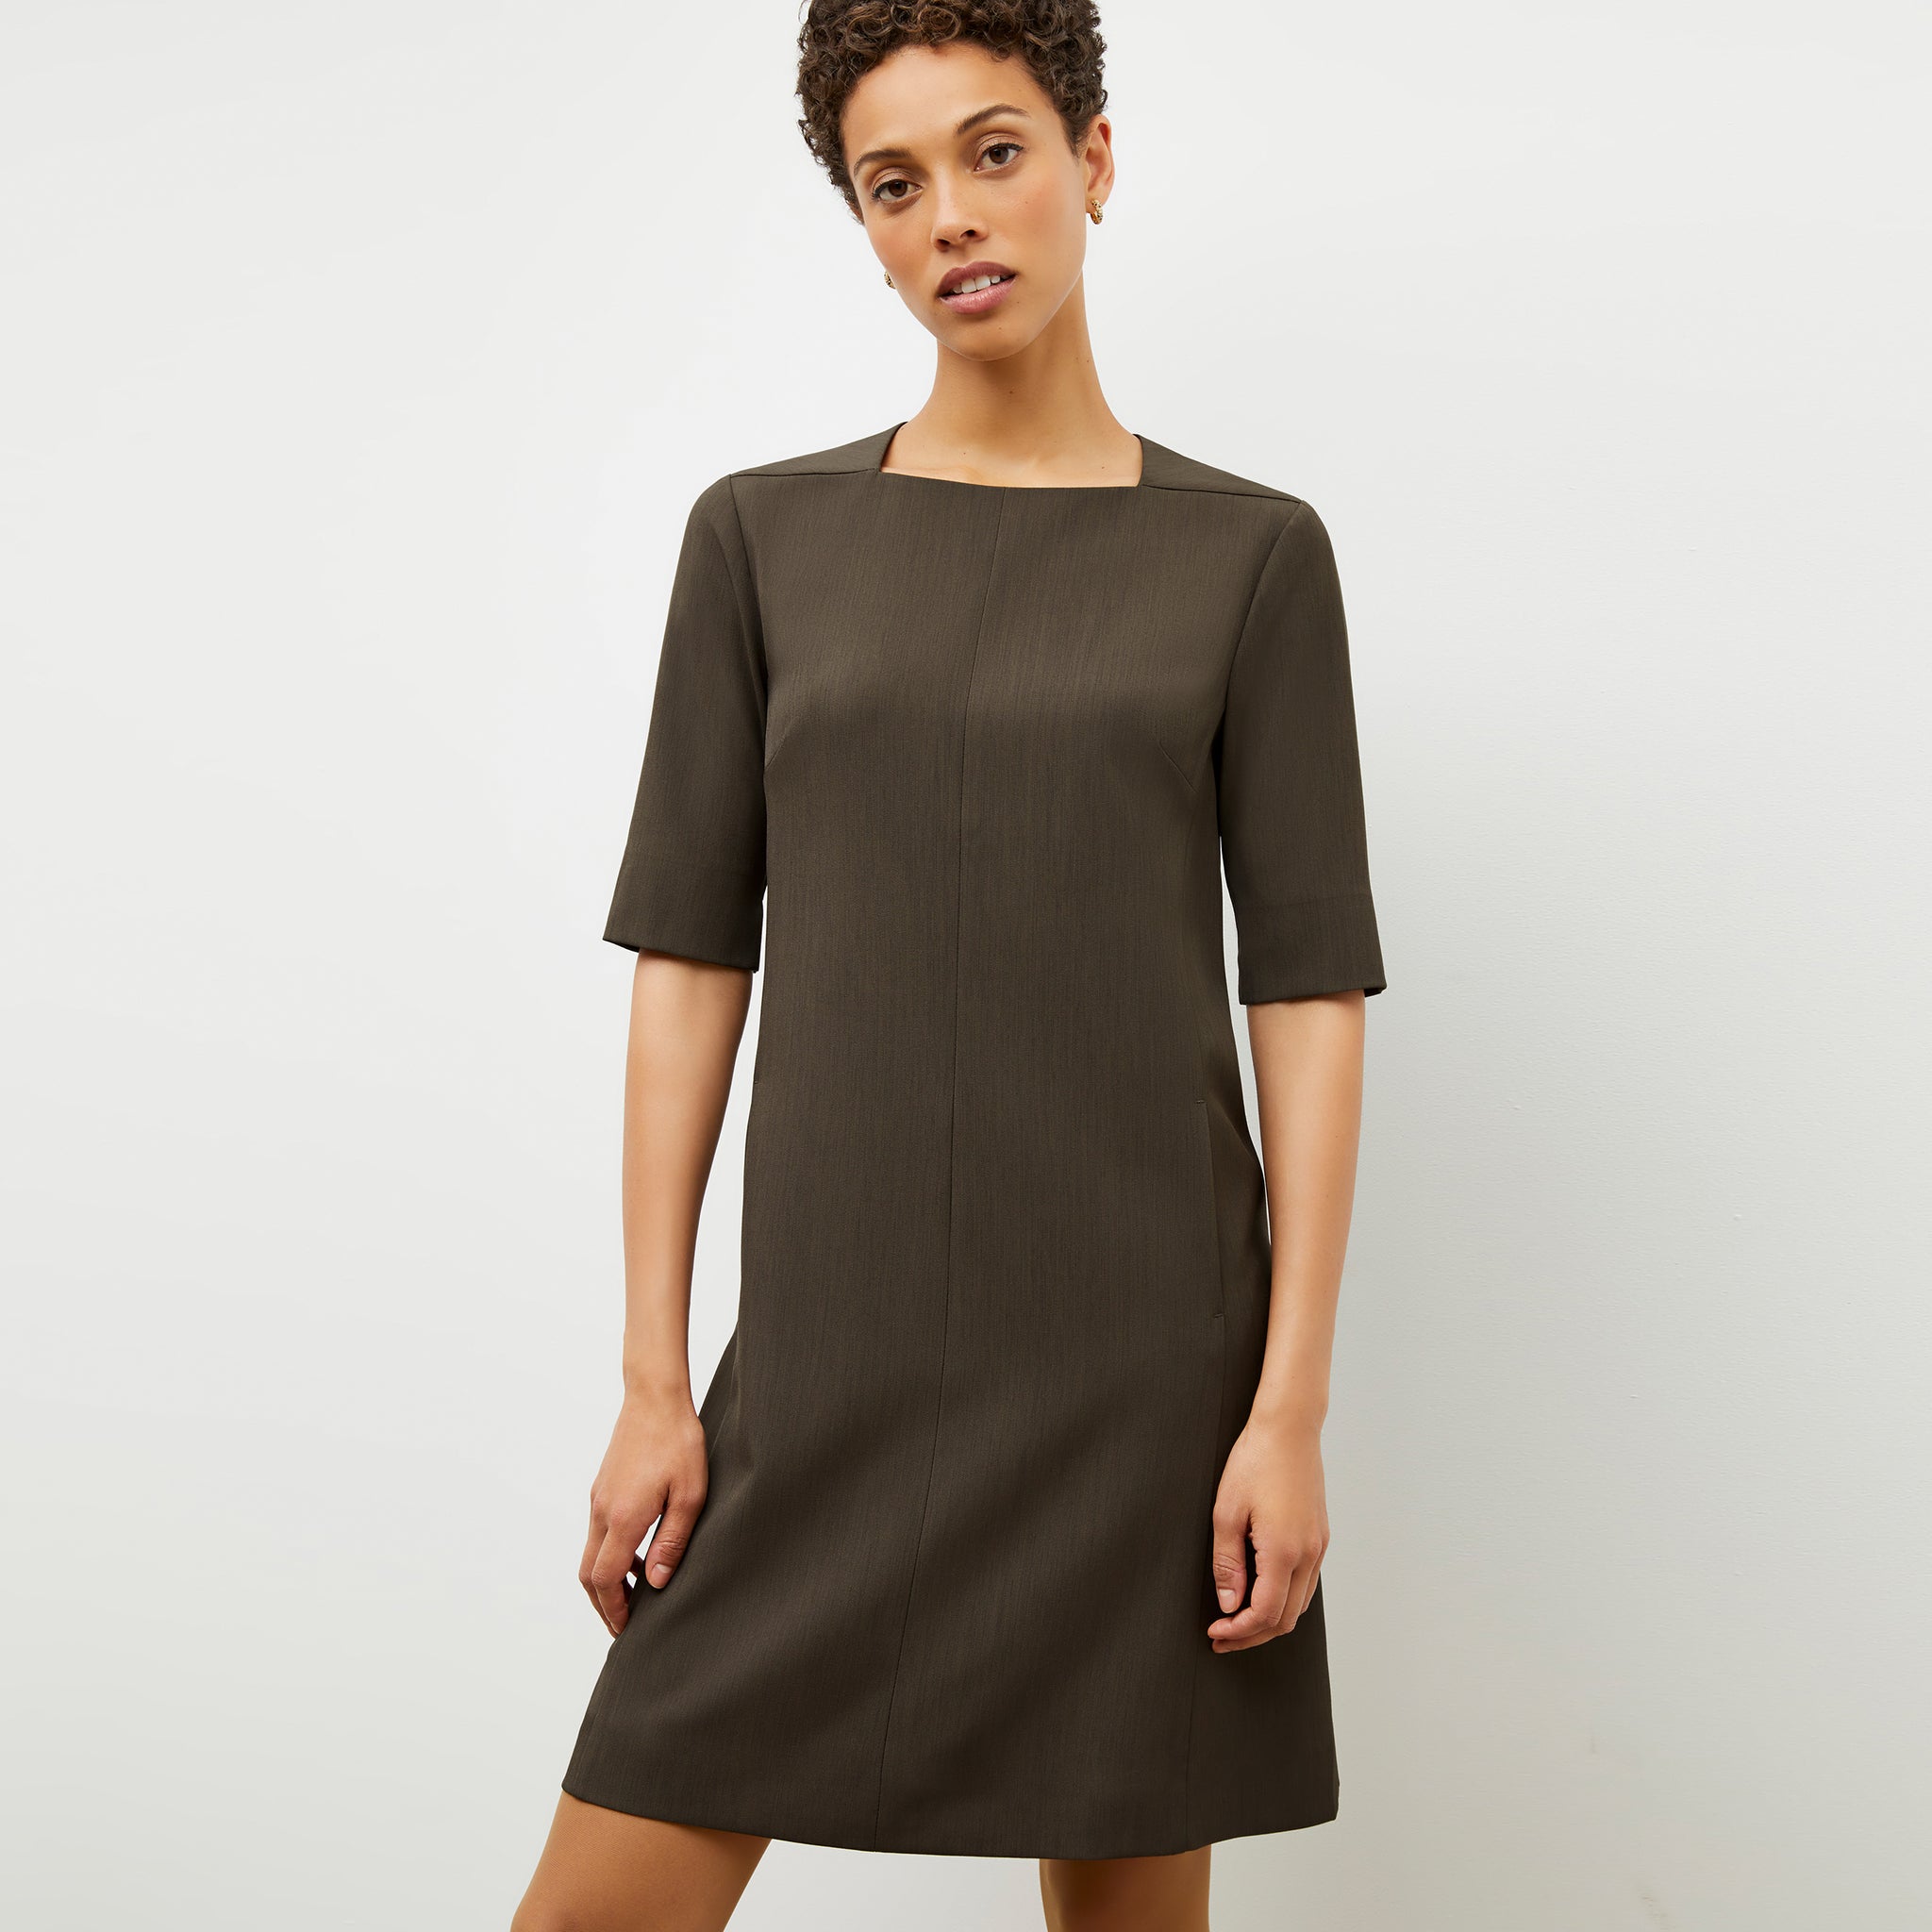 Front image of a woman wearing the emily dress in kale 